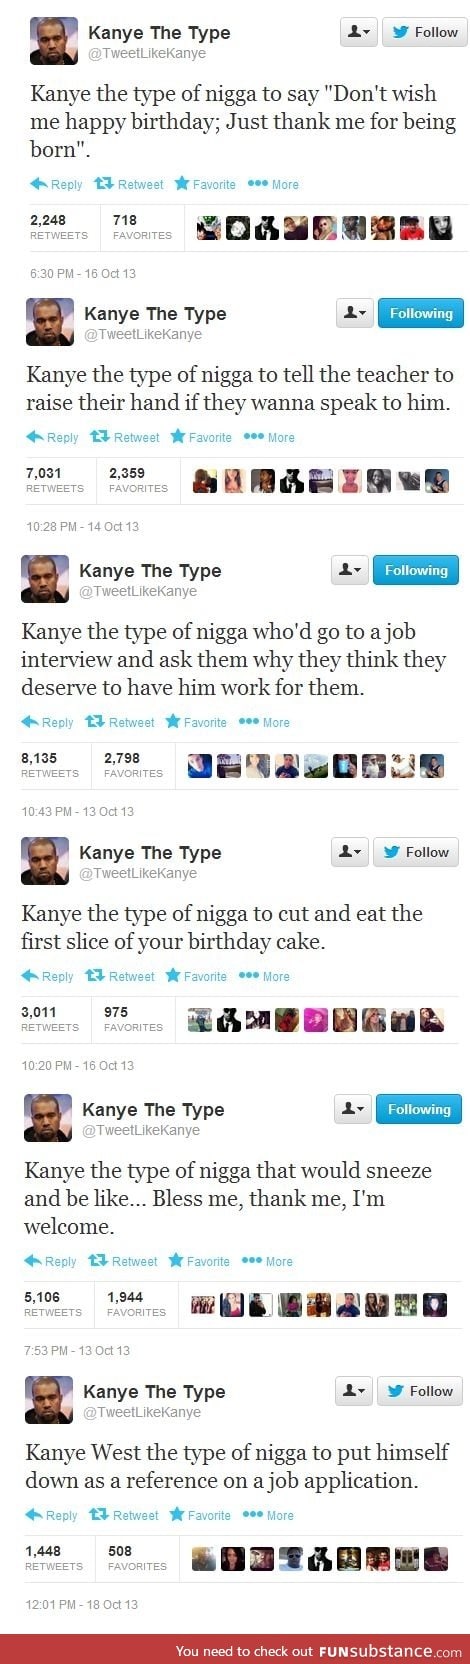 His tweets are the kanye best